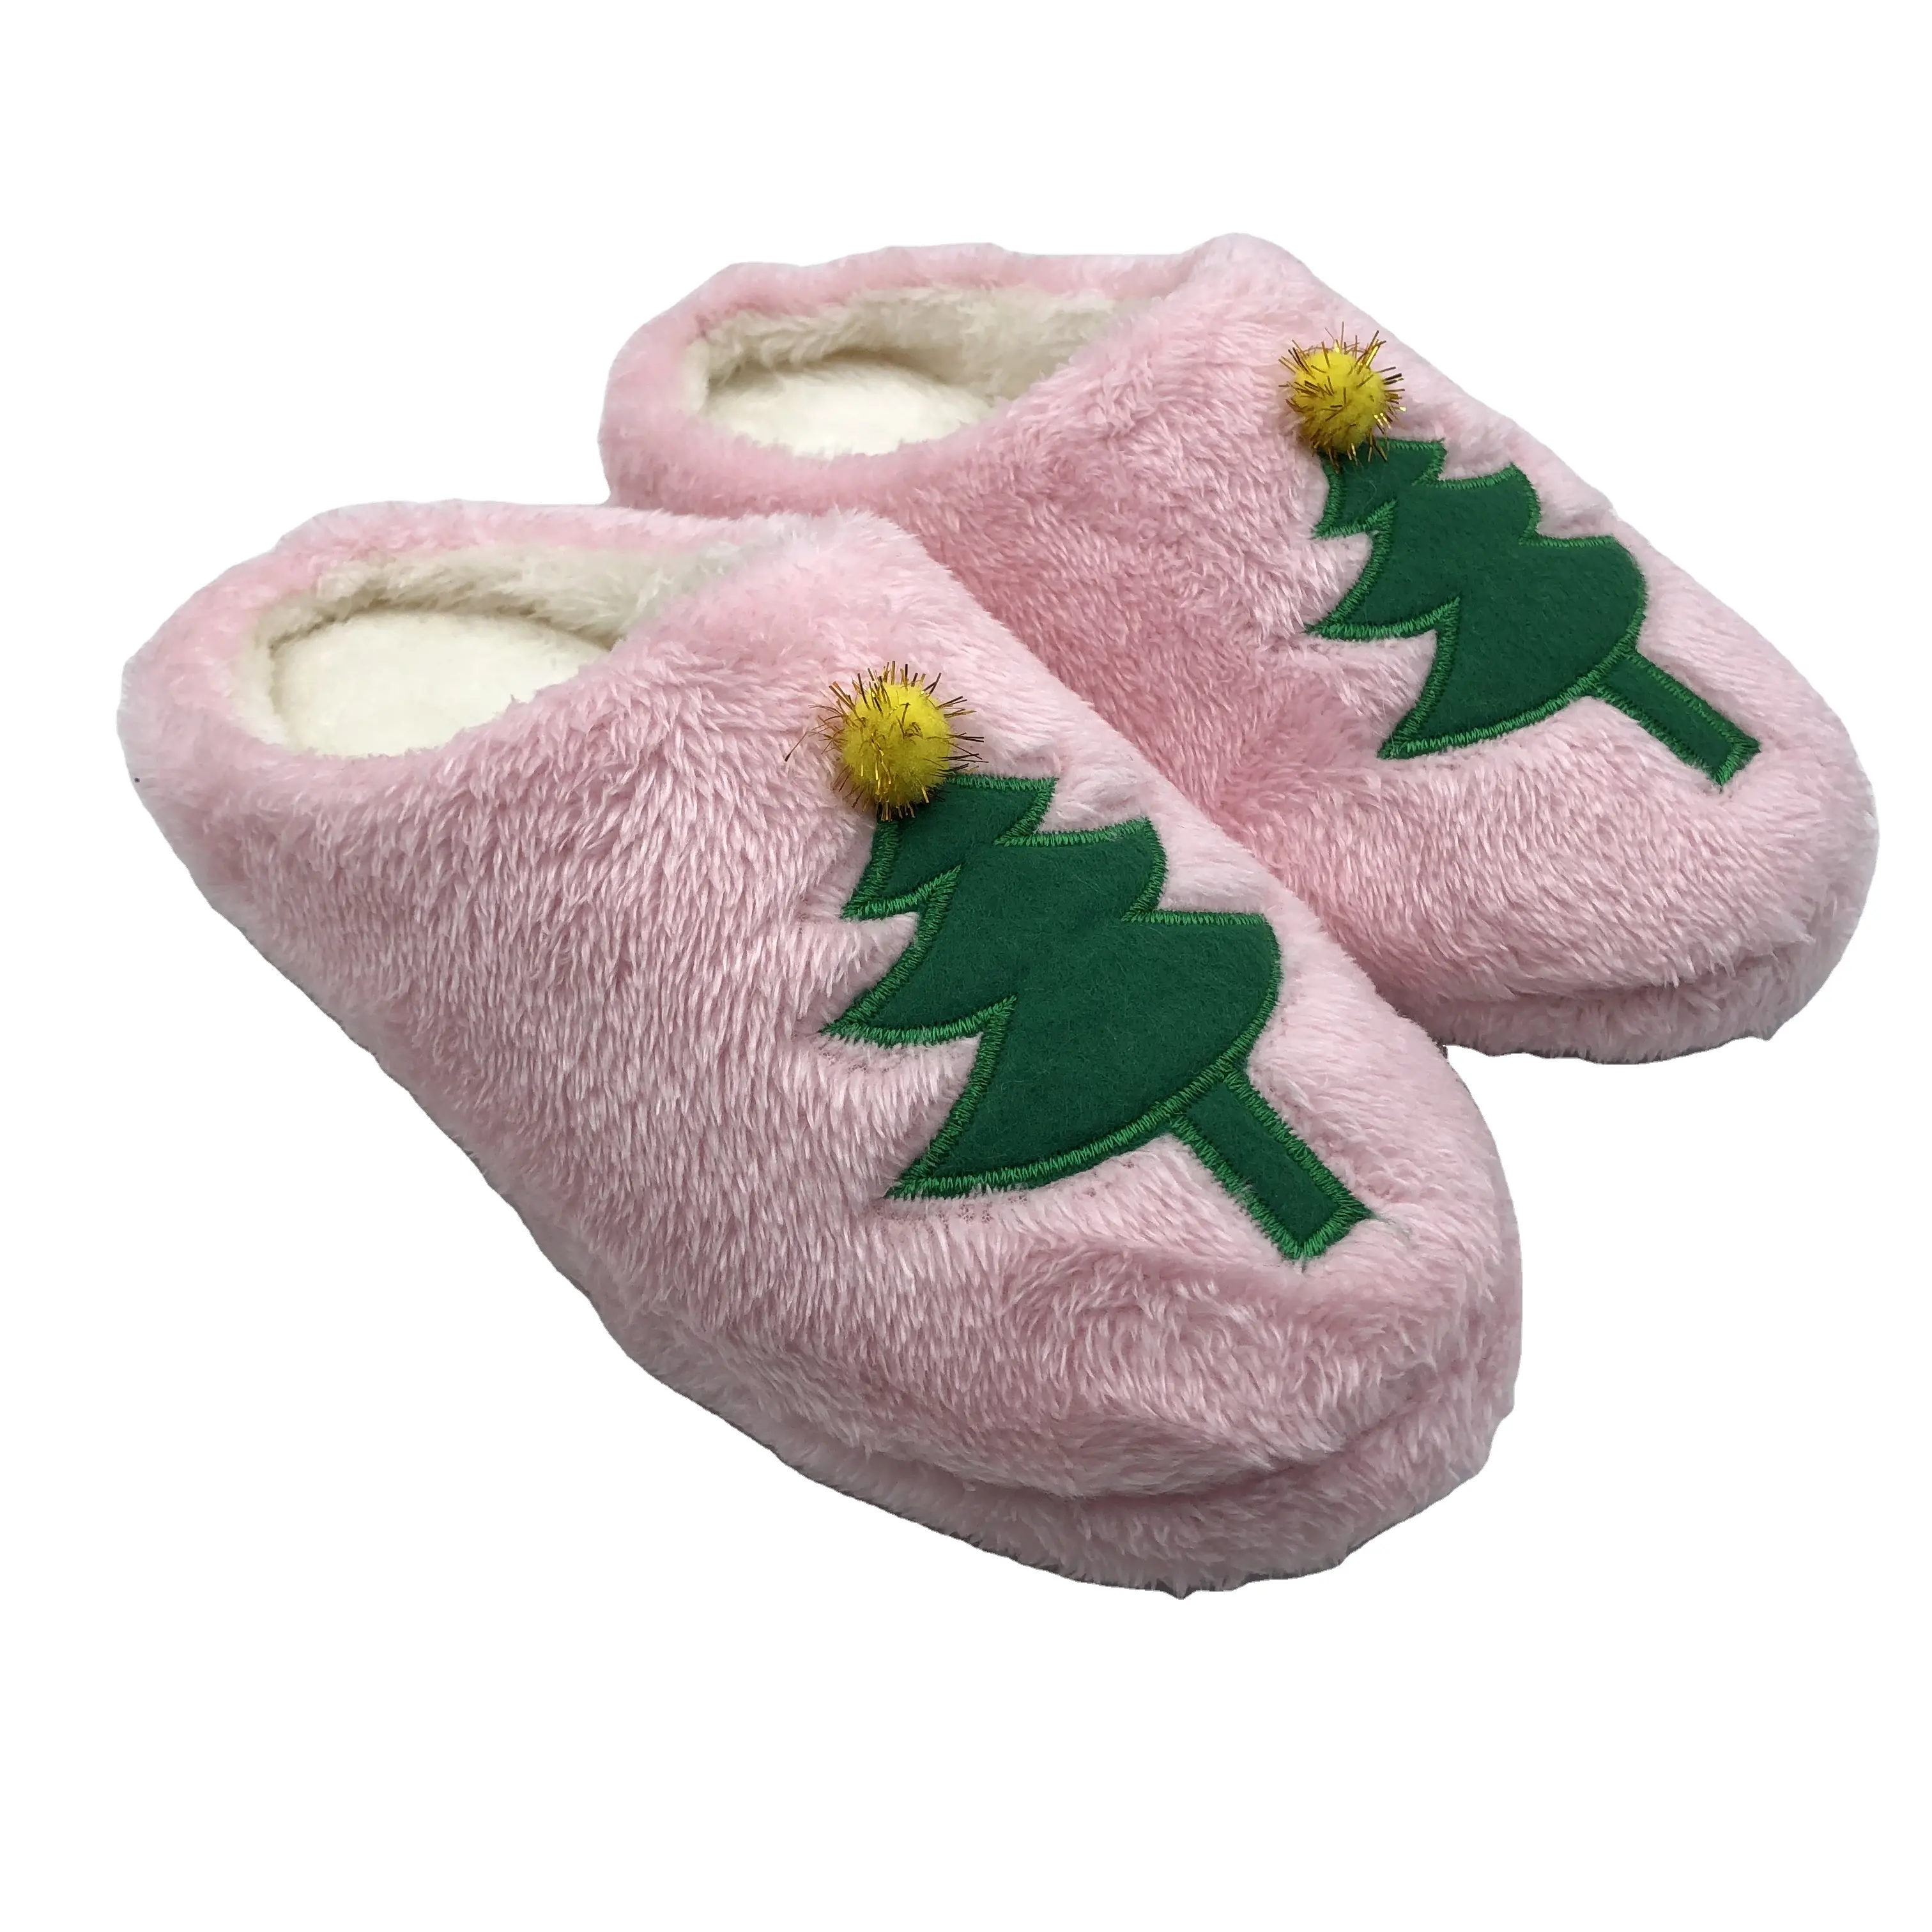 Christmas Tree Holiday Gift Slipper Home Indoor Bedroom Fashion Family Use Kids and Adult Slippers for Winter Xmas Winter Shoes